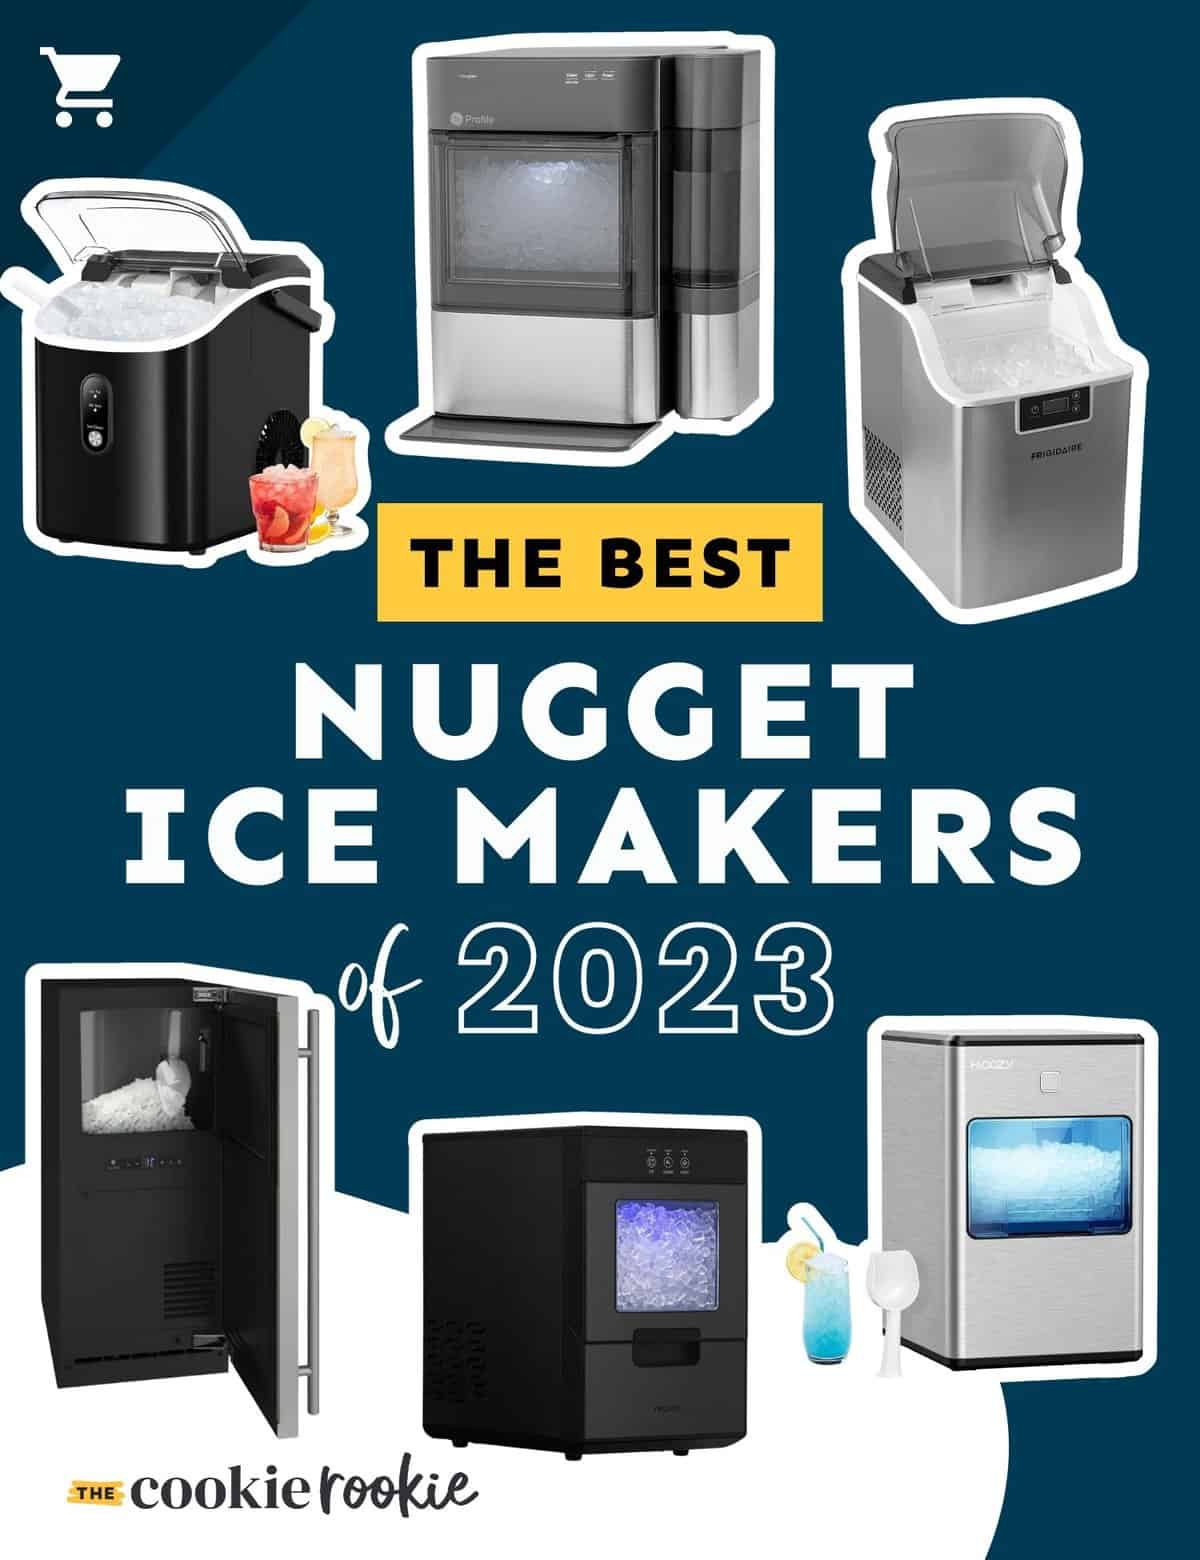  Newair Countertop Nugget Ice Maker Up to 30lbs of Ice